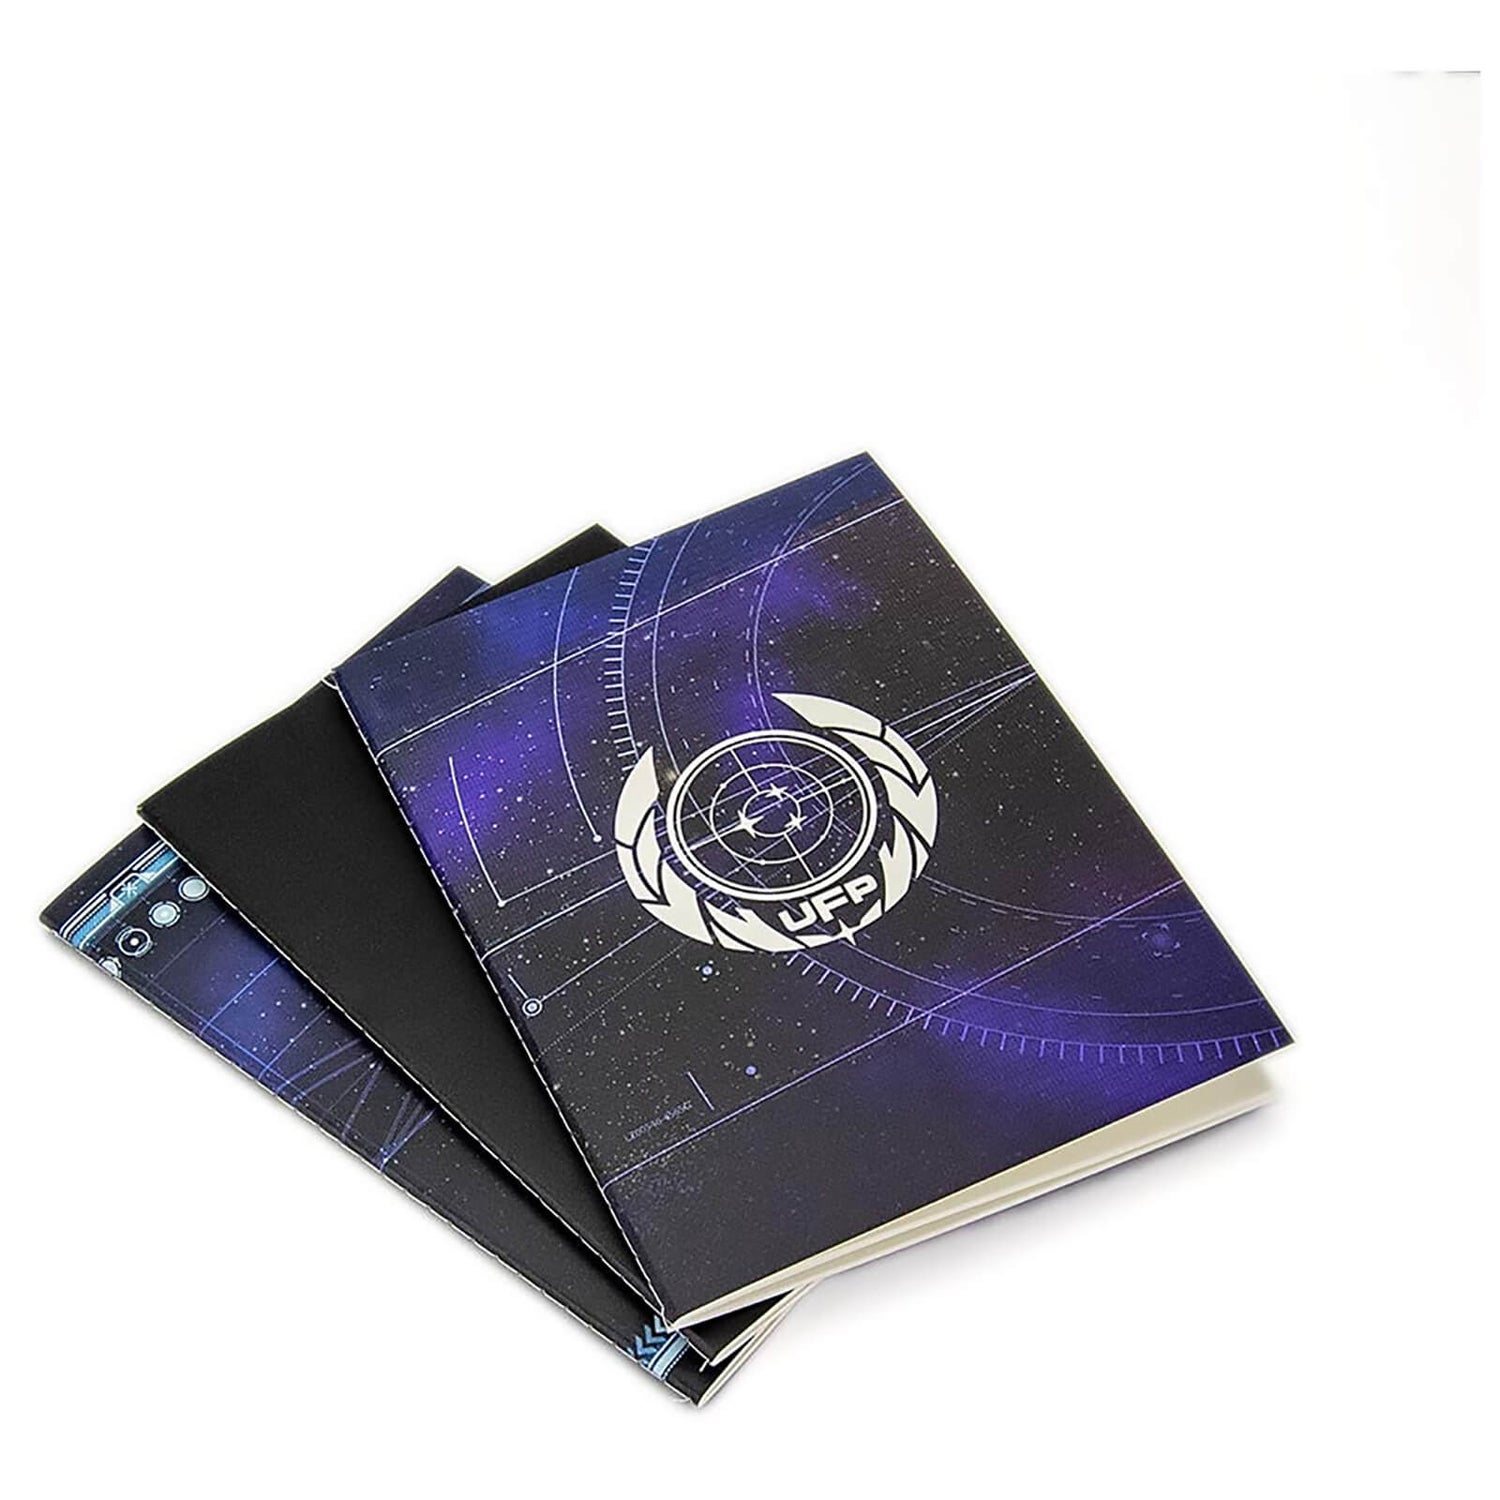 Coop Star Trek Discovery Softcover Journals Set of 3